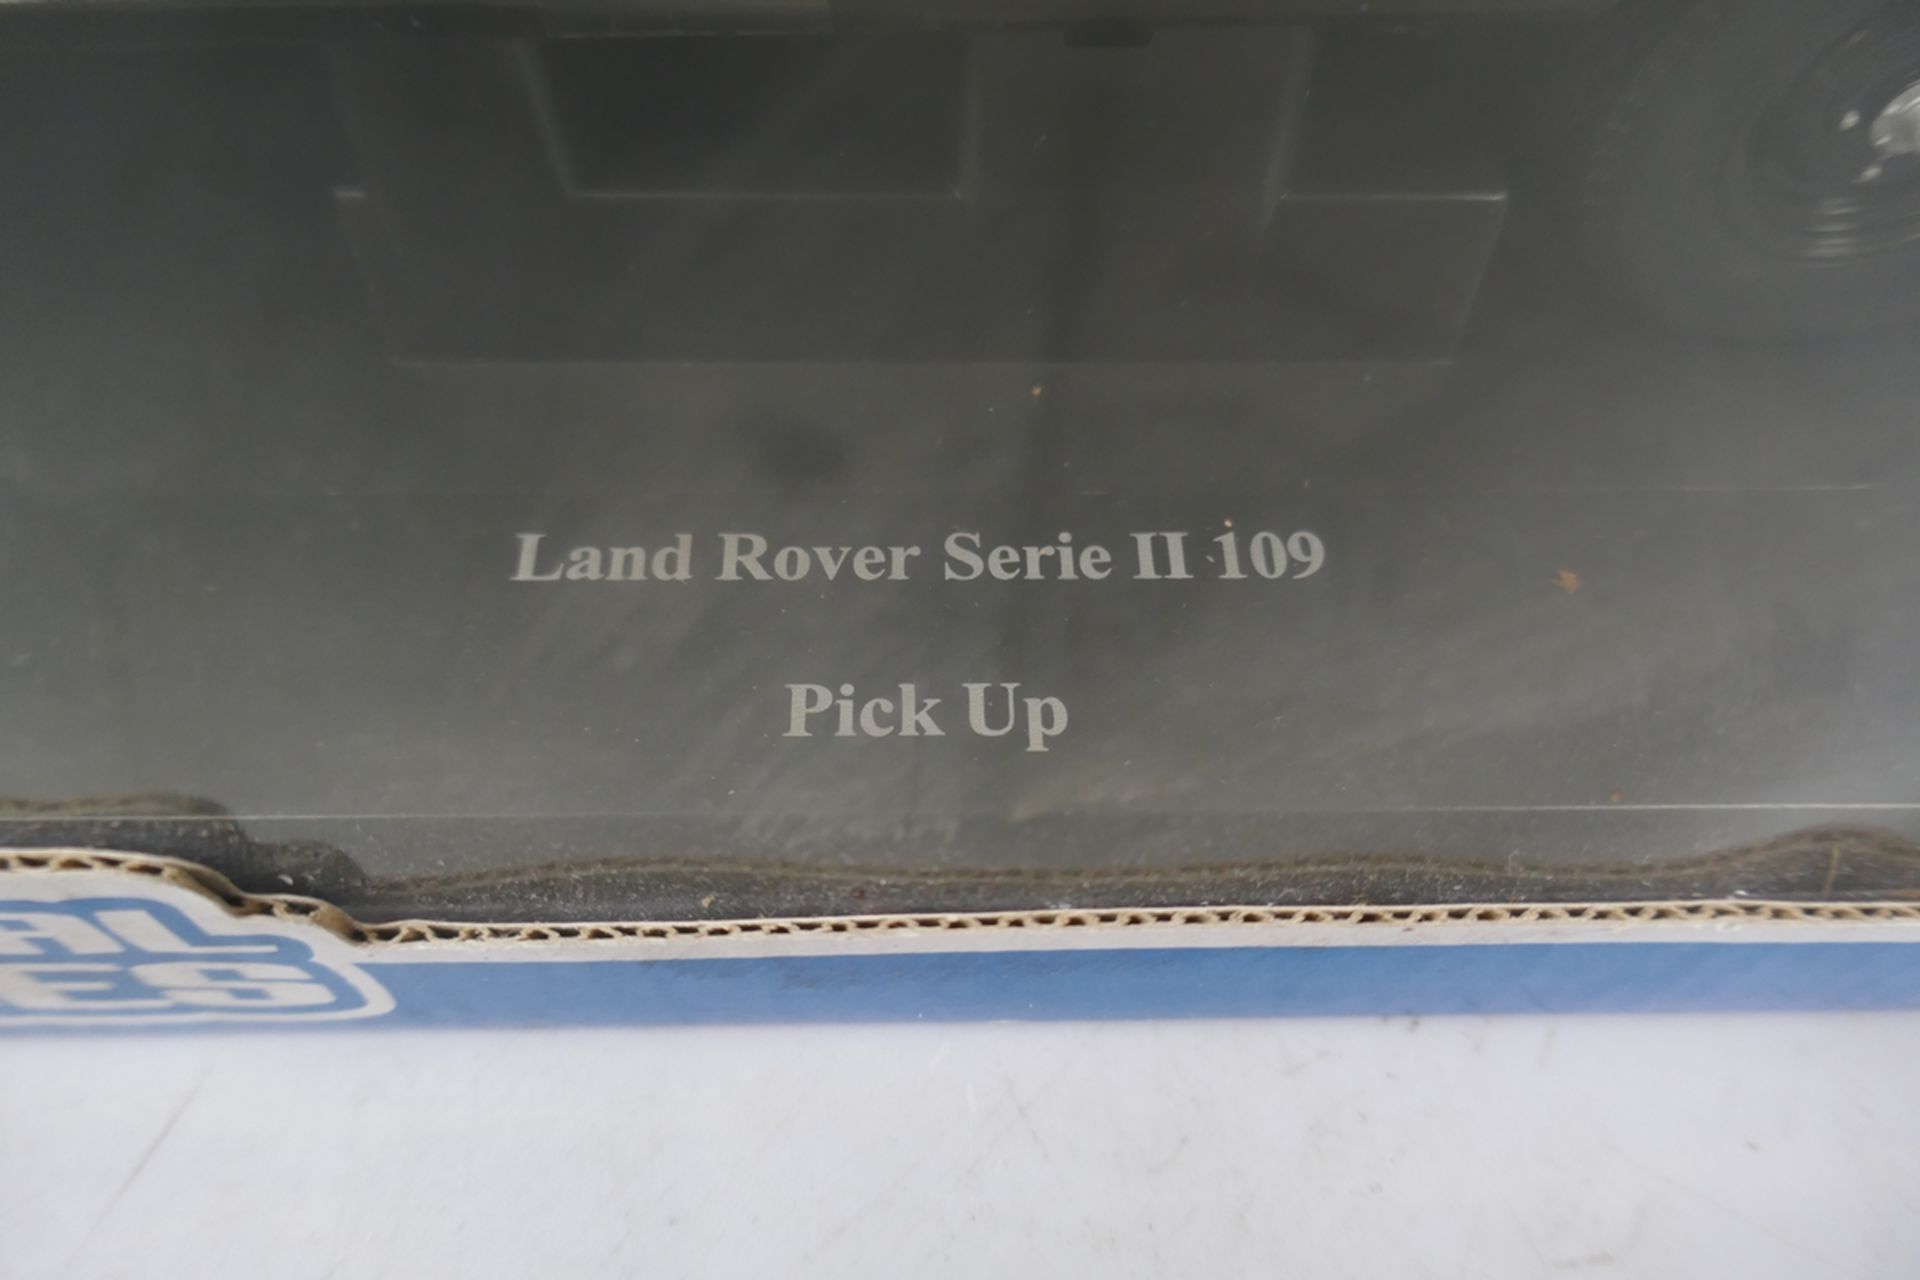 Universal Hobbies 1:18 scale Land Rover Series 2 pick up - Image 2 of 2